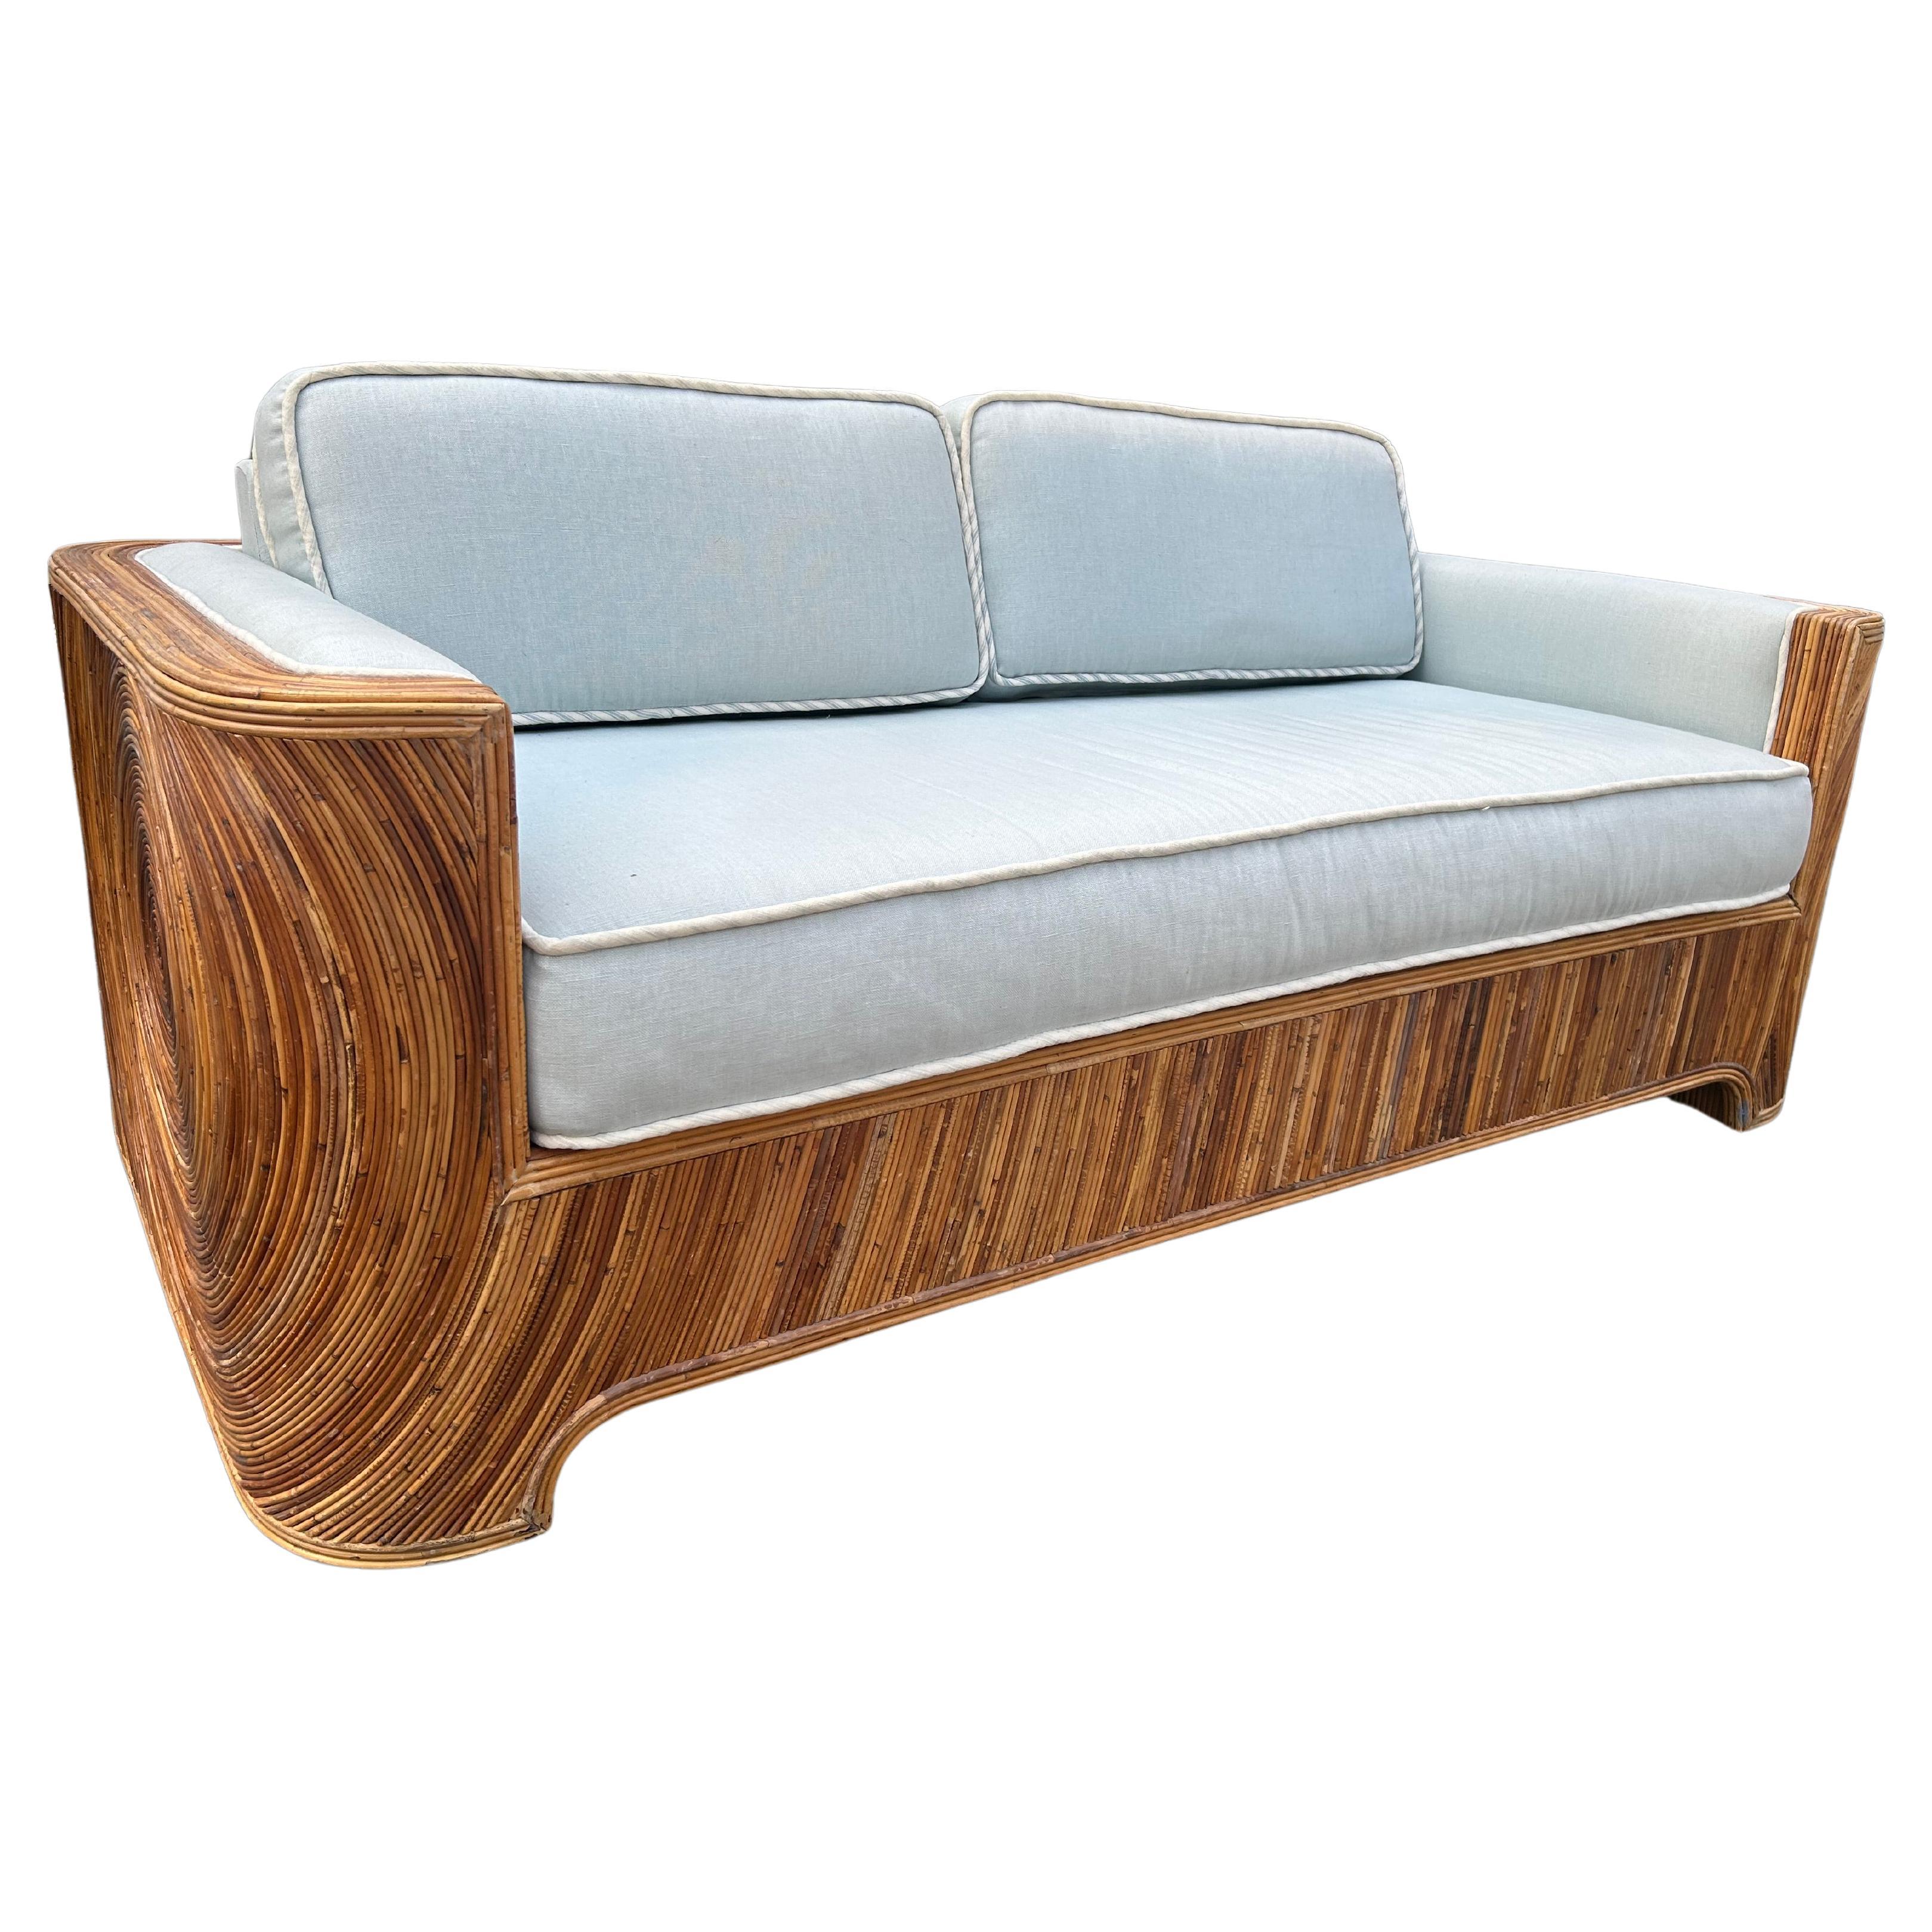 Fantastic Adrian Pearsall for Comfort Designs bent pencil reed loveseat sofa.   This piece is spectacular in person and the light blue linen upholstery is still in nice condition too-some minor sun fading.  This piece measures  27.25